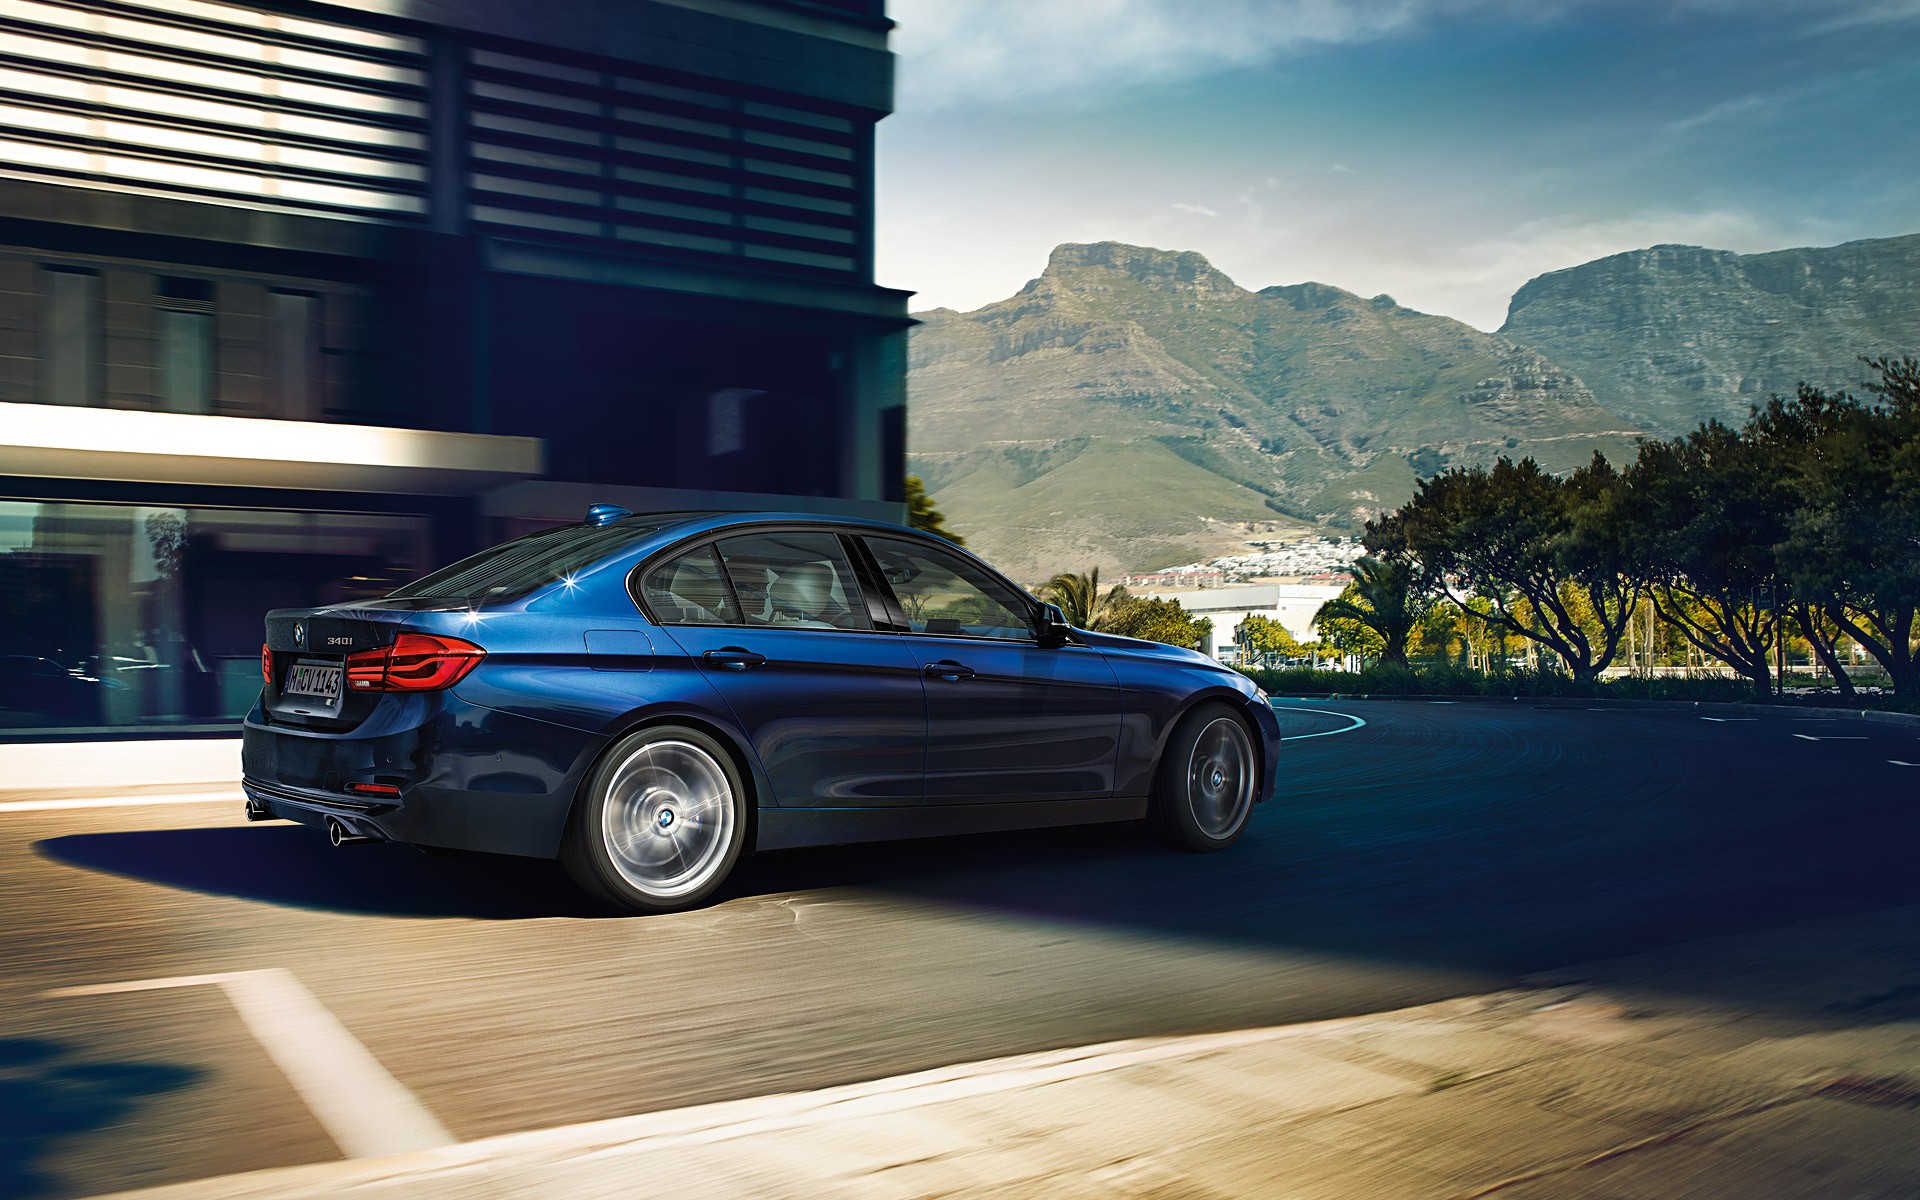 Your Batch of 2016 BMW 3 Series Facelift Wallpapers Is Here